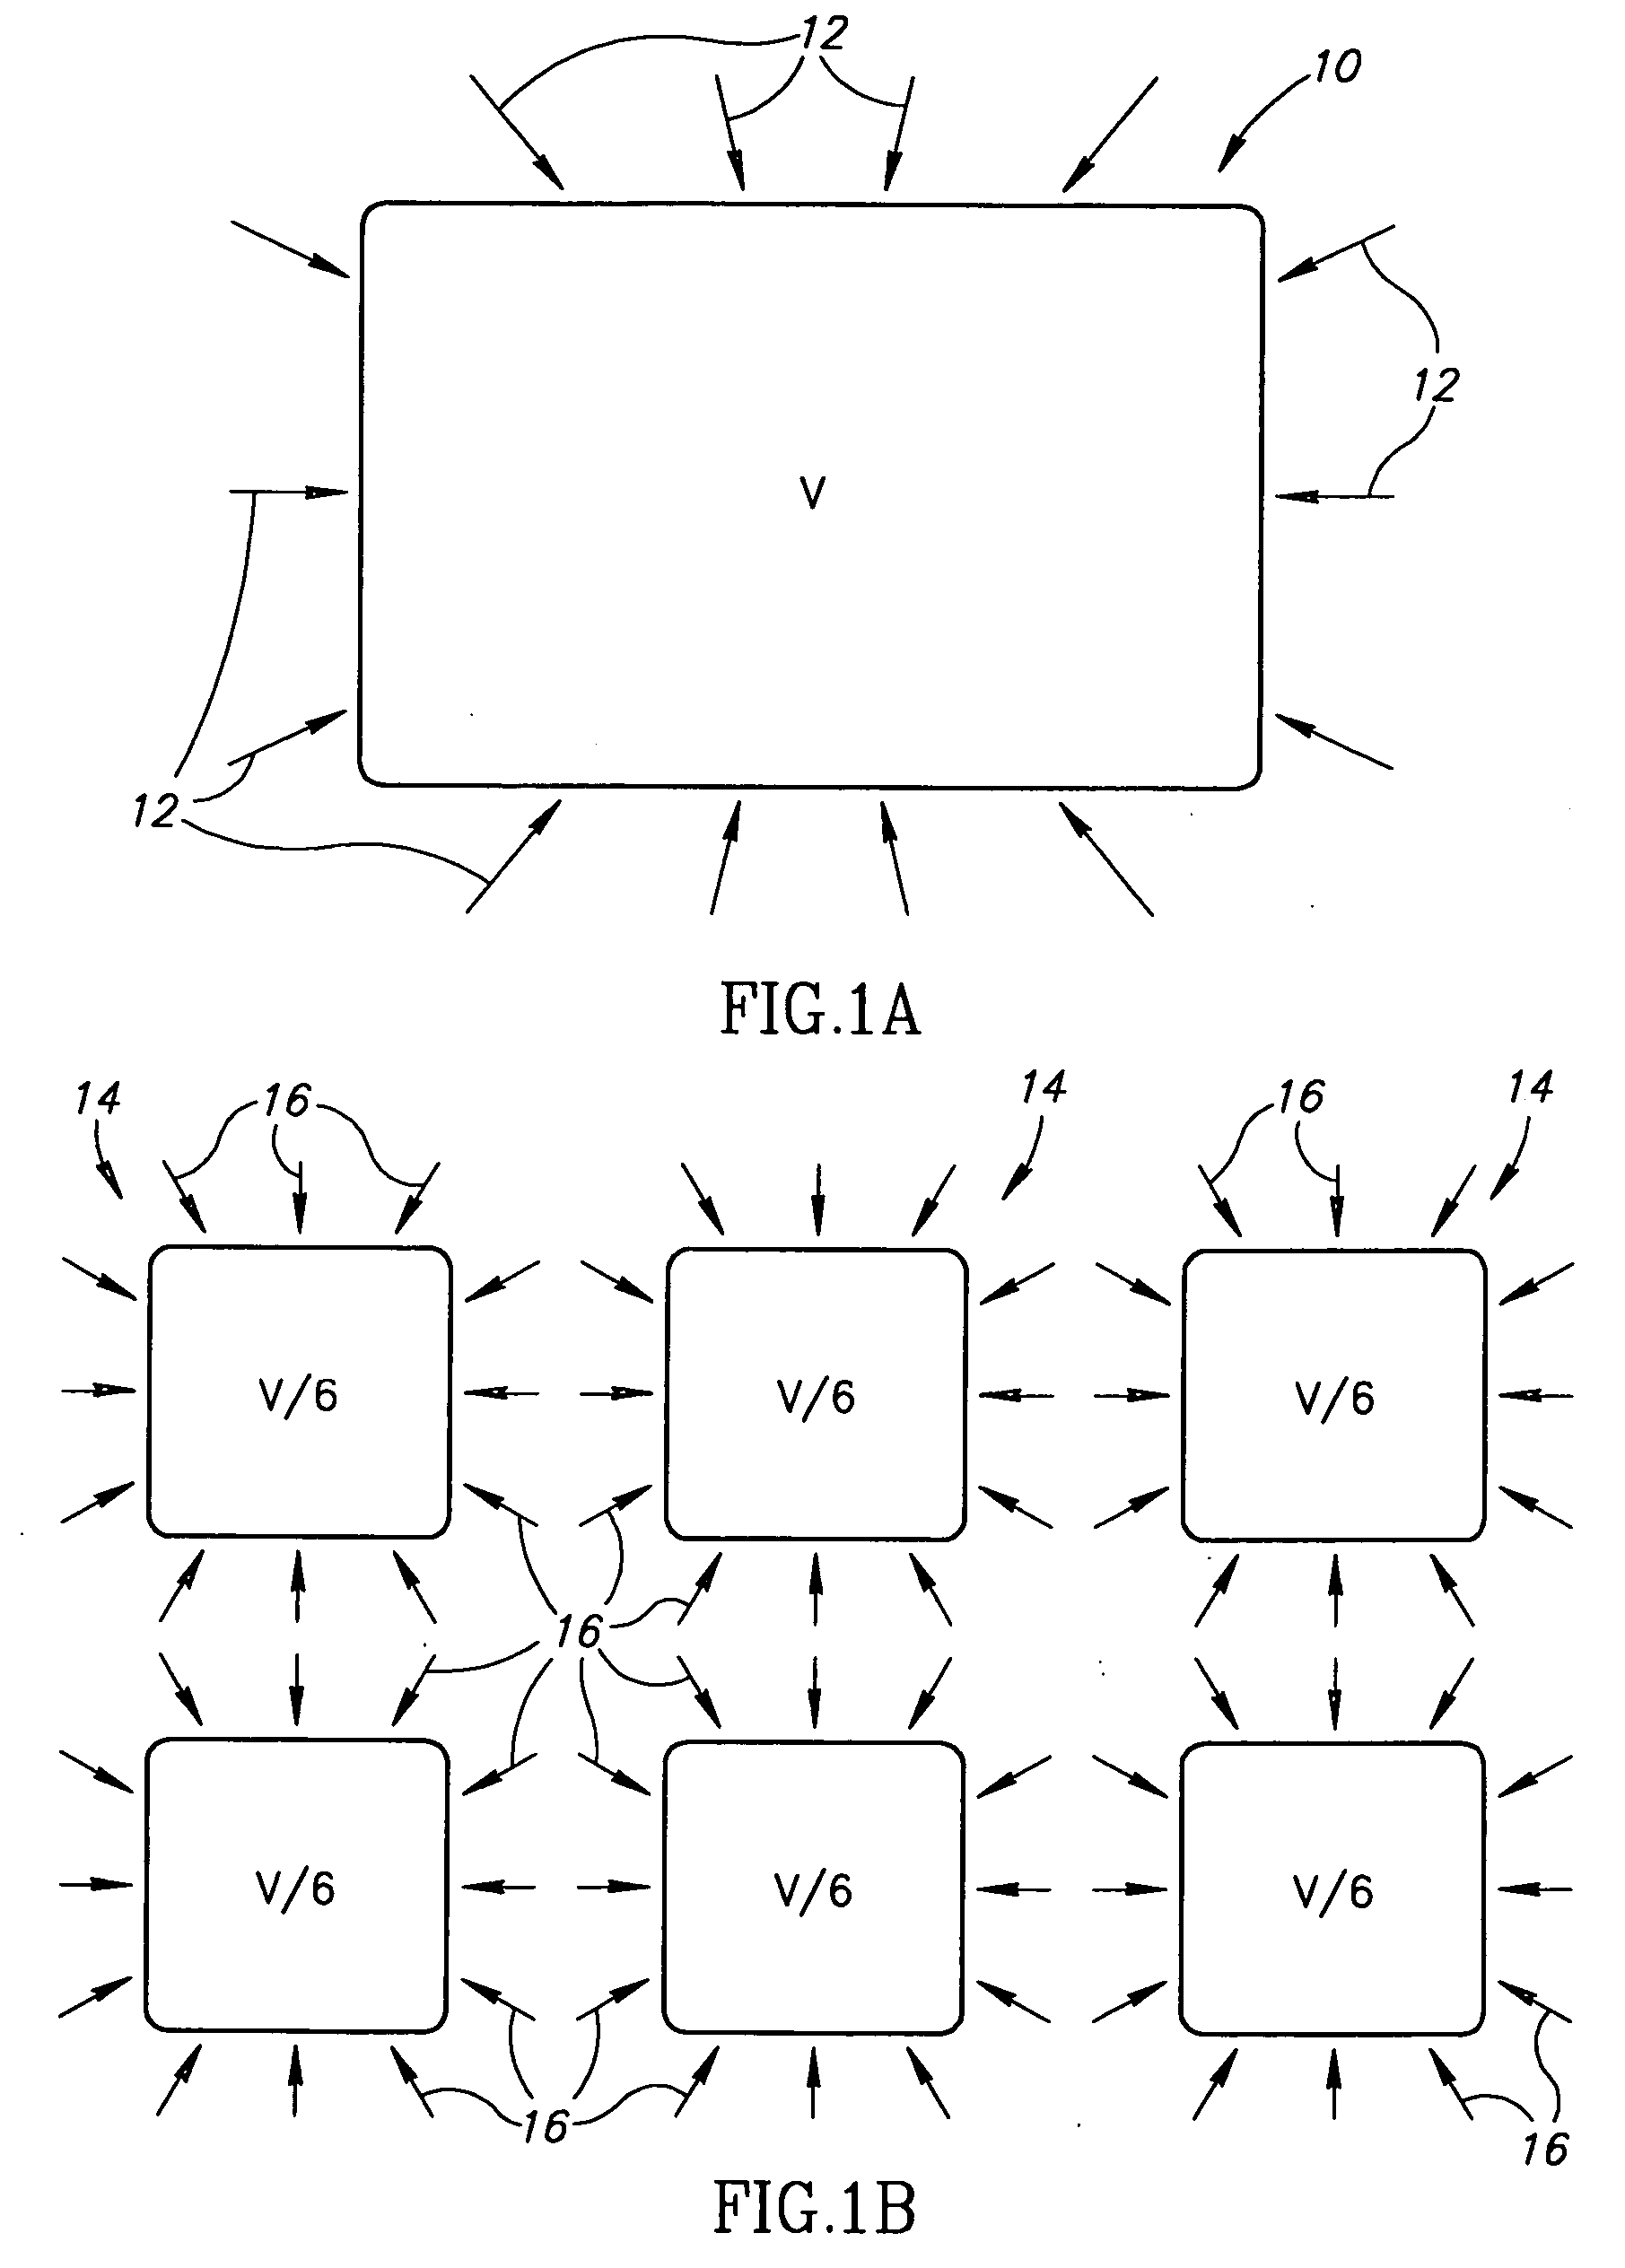 Flexible ultra-low permeability transport system and method